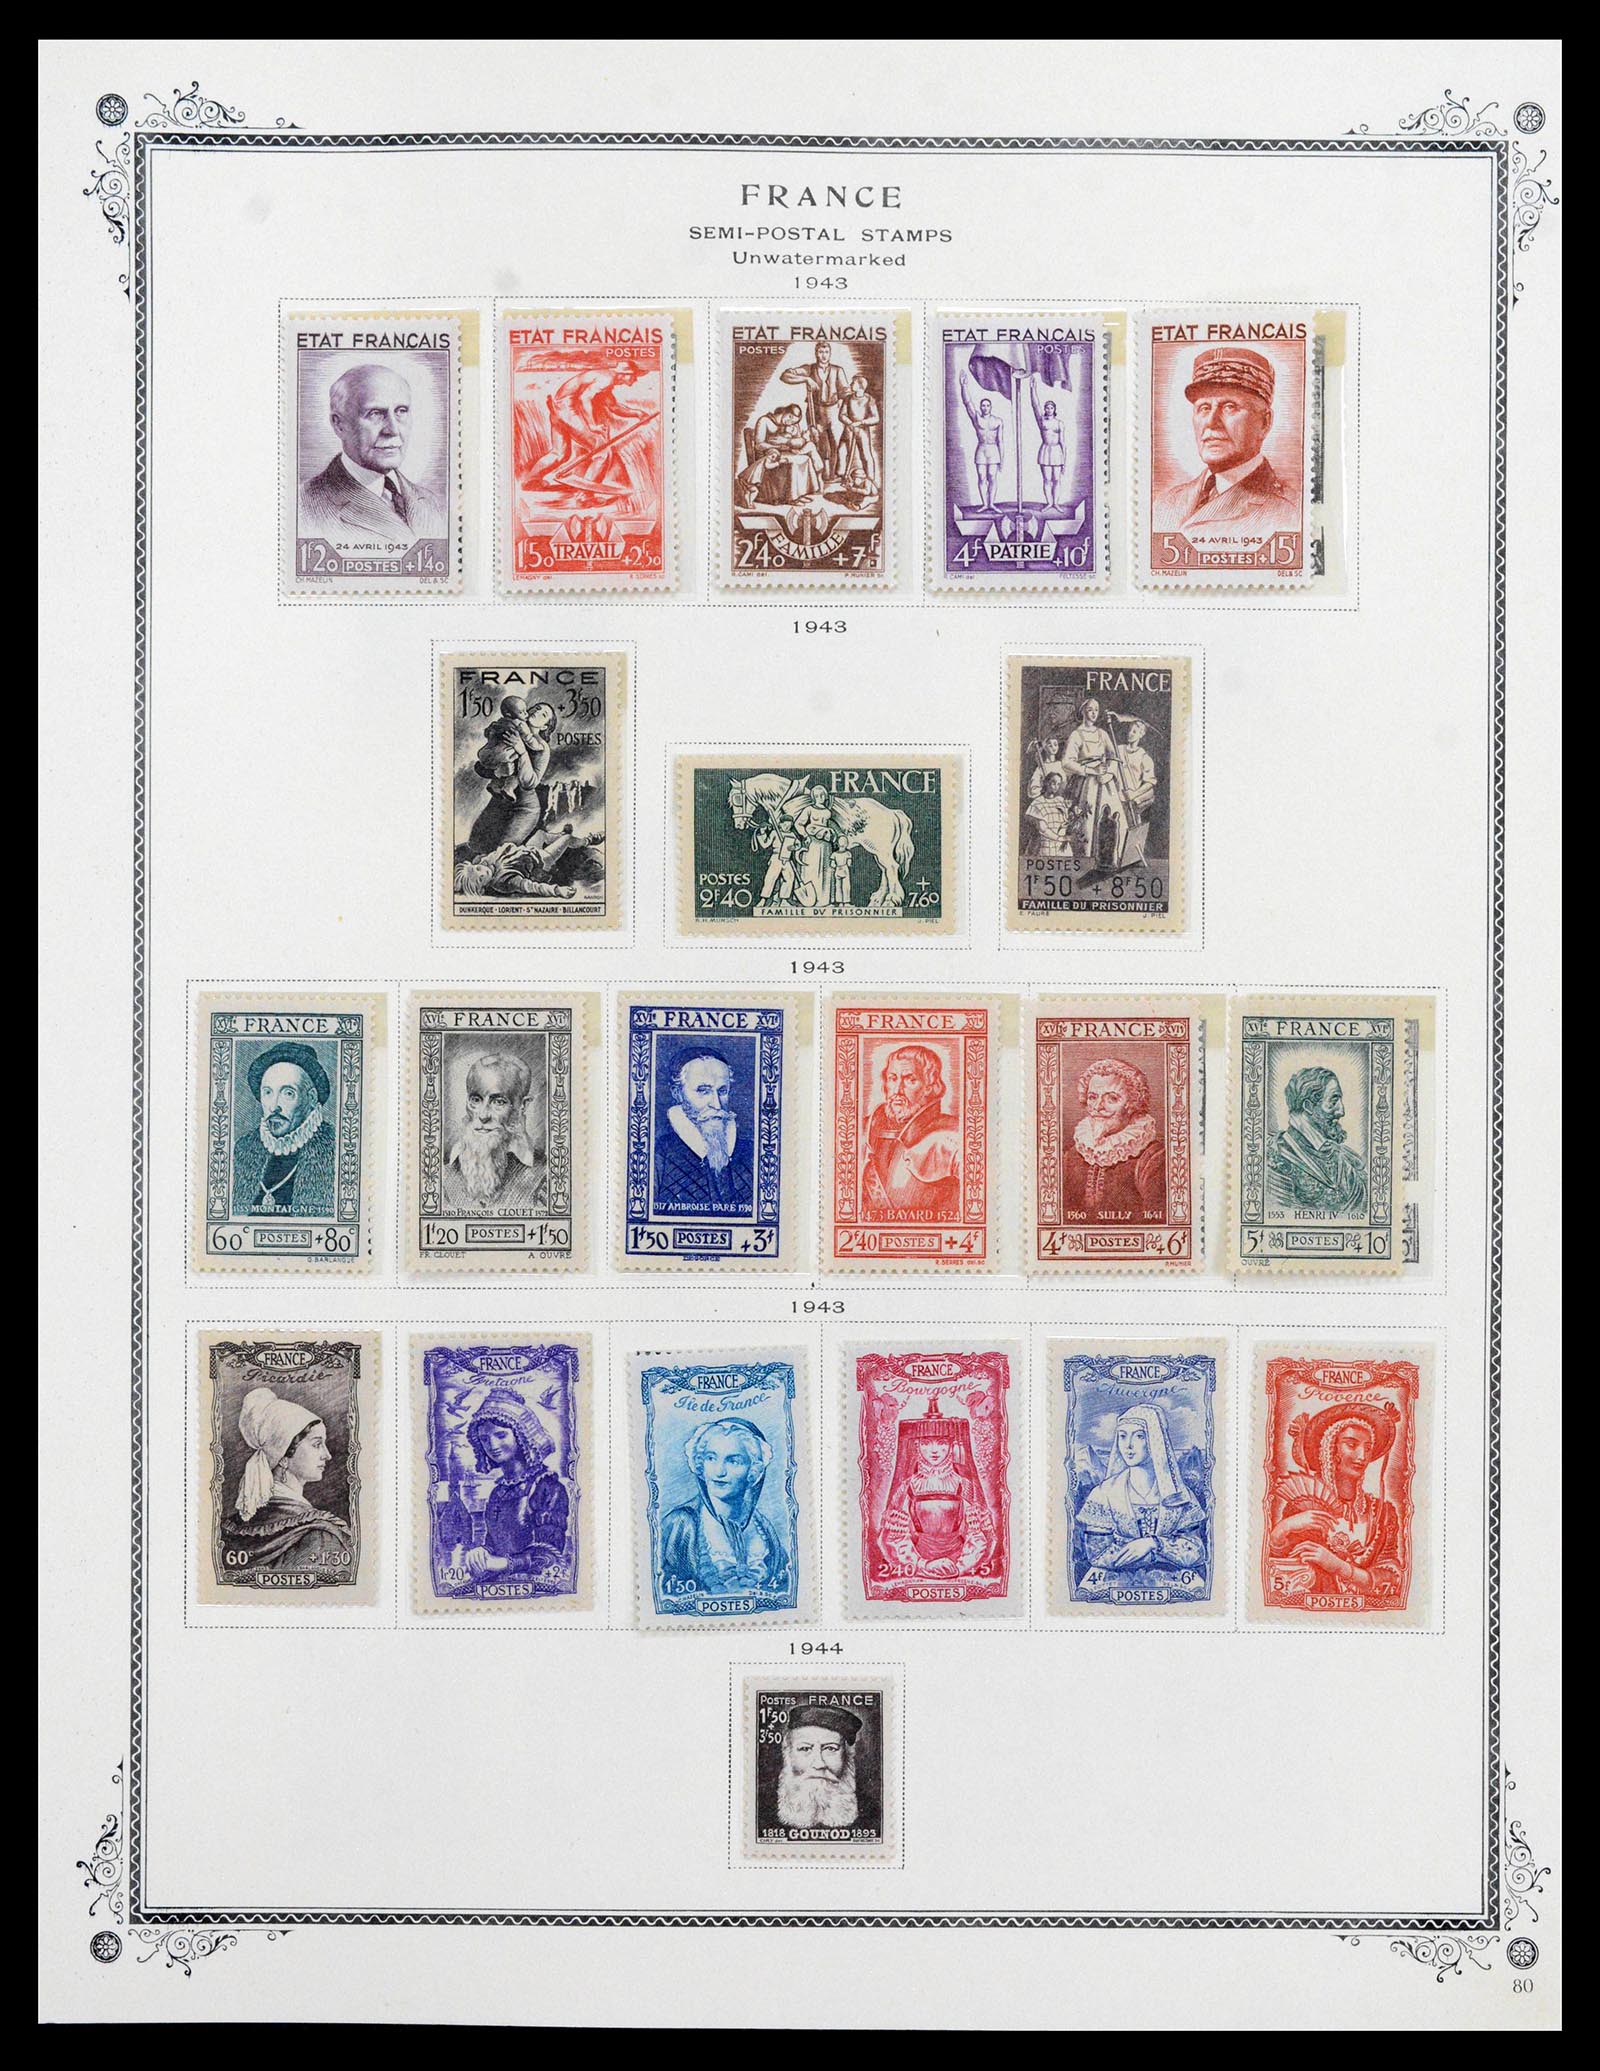 39154 0126 - Stamp collection 39154 France 1849-1984.